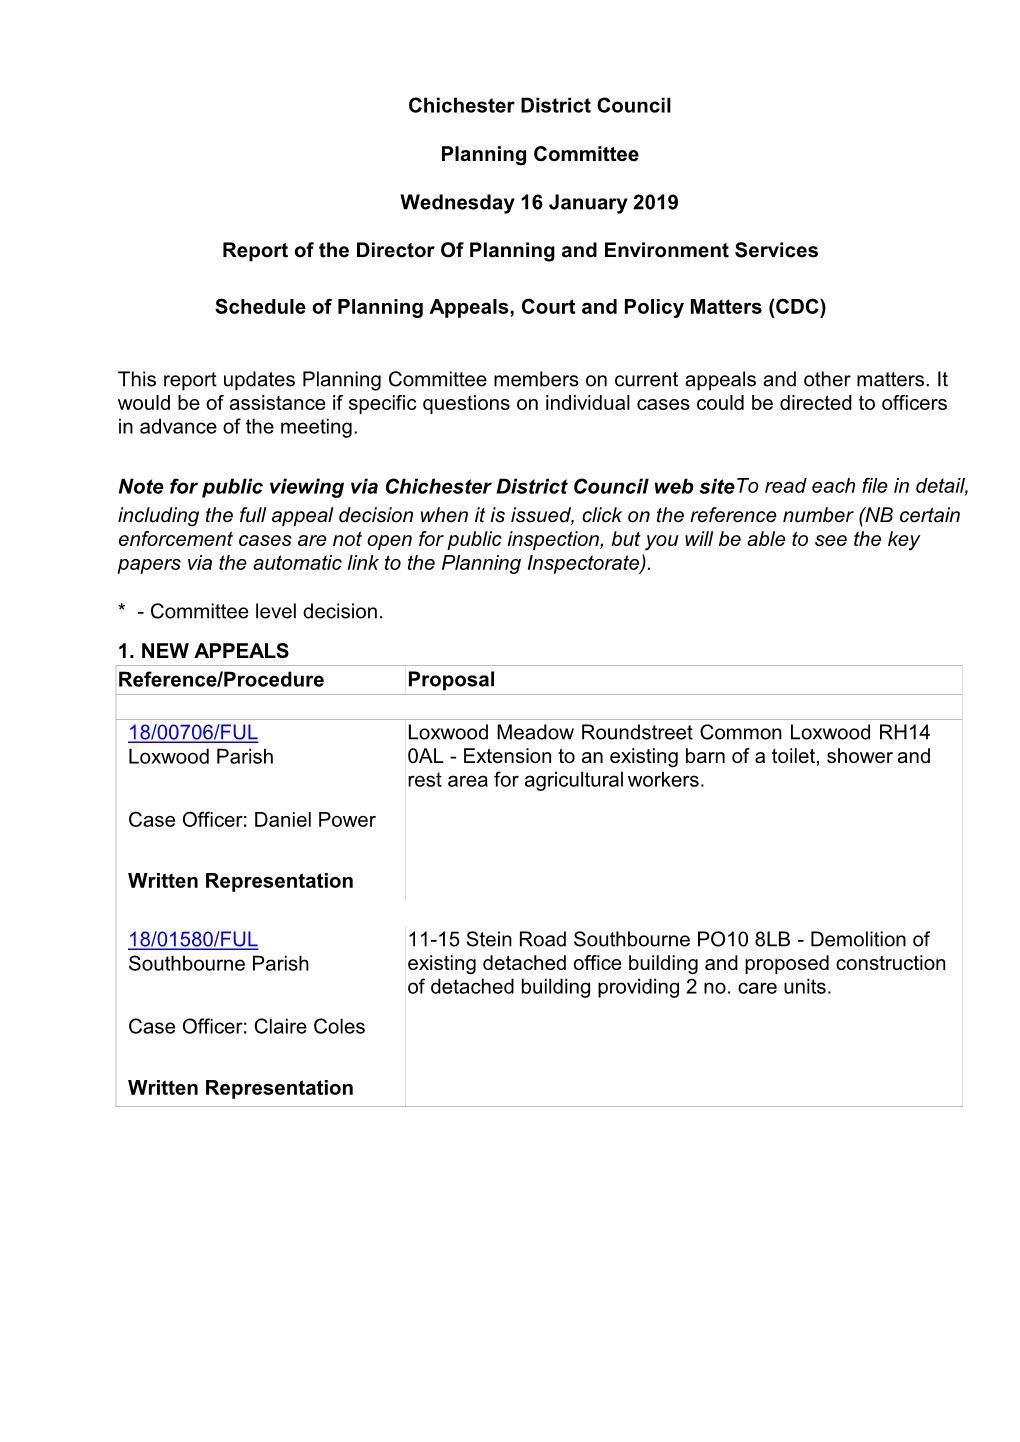 Chichester District Council Planning Committee Wednesday 16 January